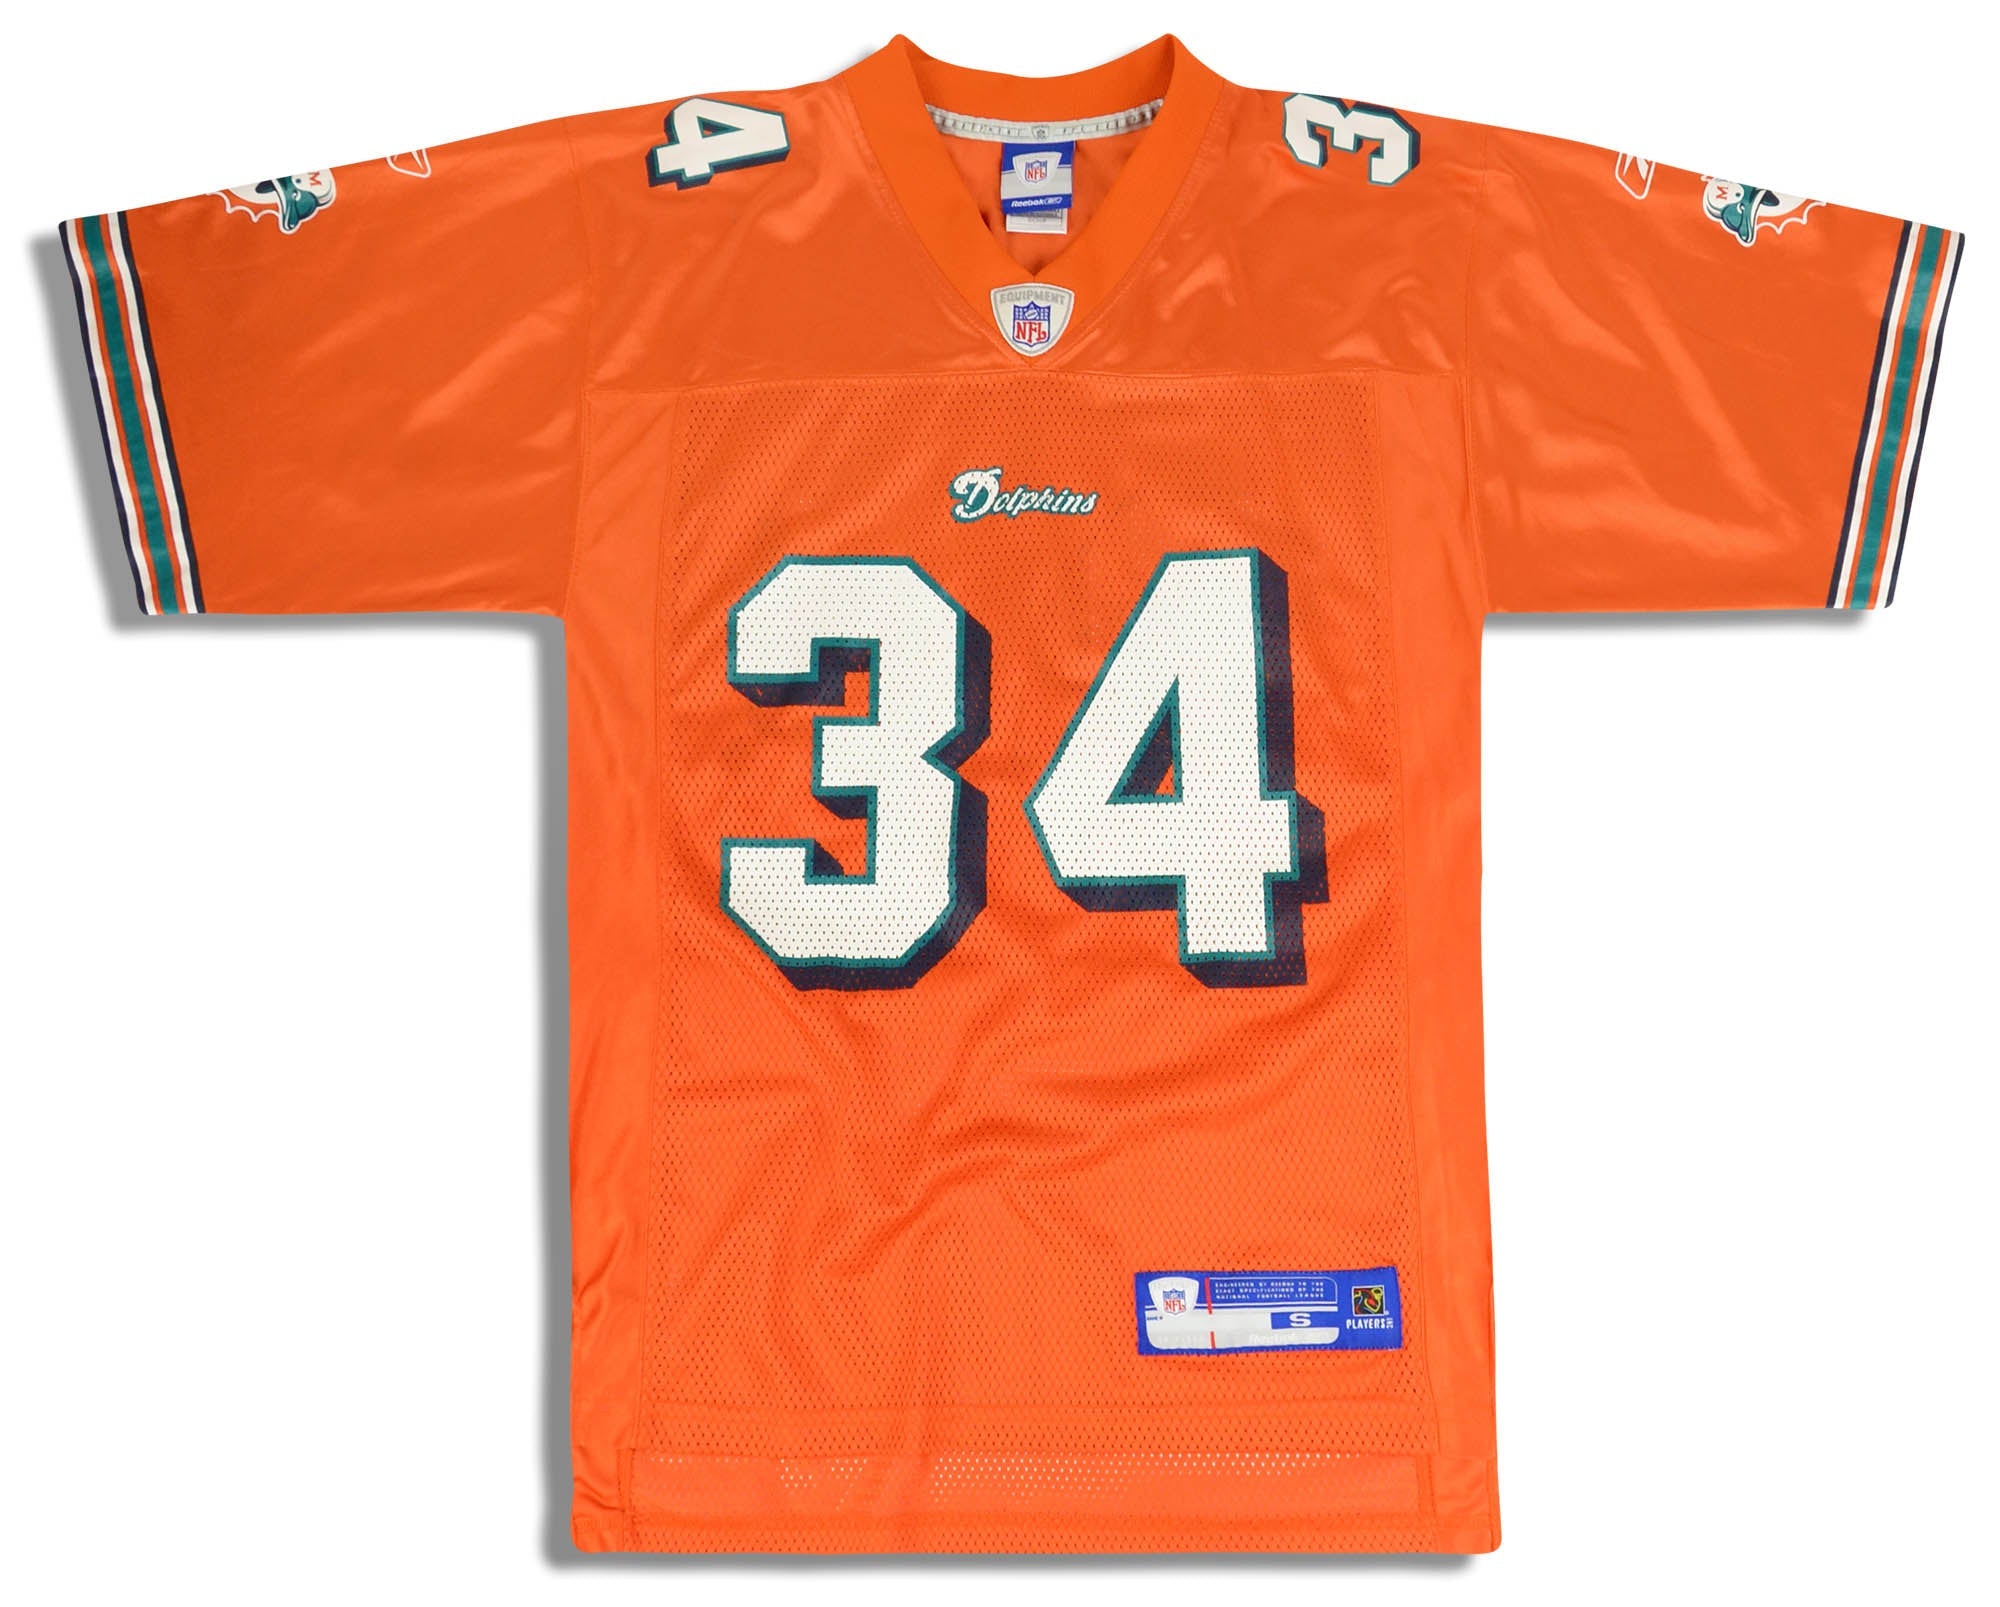 number 34 miami dolphins